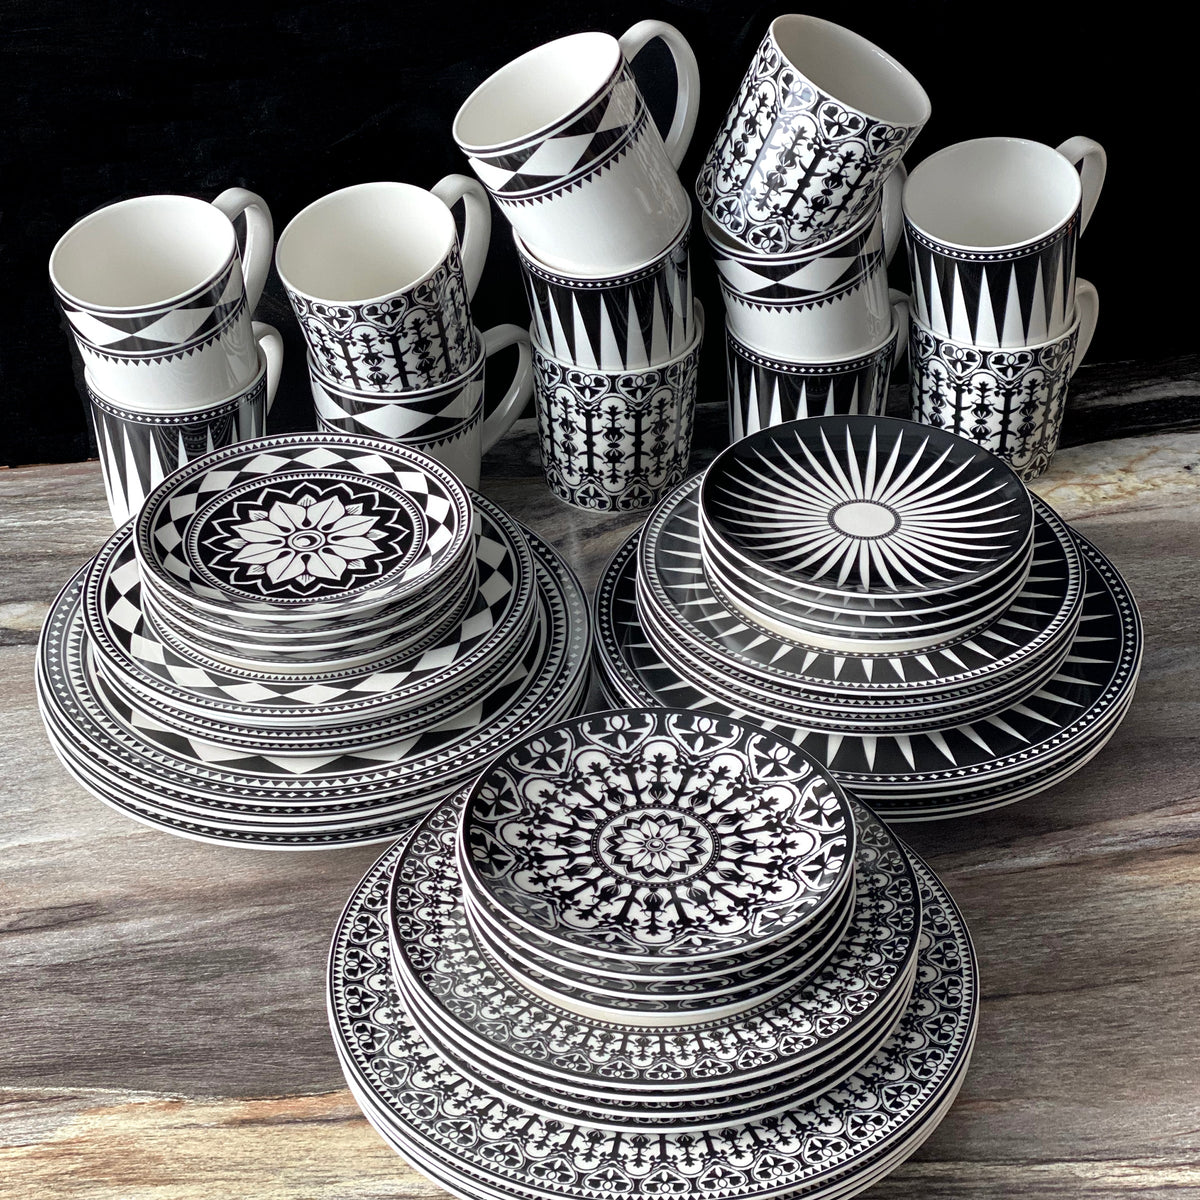 A Casablanca Rimmed Dinner Plate from Caskata Artisanal Home with black and white patterns is arranged on a wooden surface, featuring plates, bowls, and mugs stacked in a neat display. The hand-decorated details add an elegant touch to this high-fired porcelain collection.